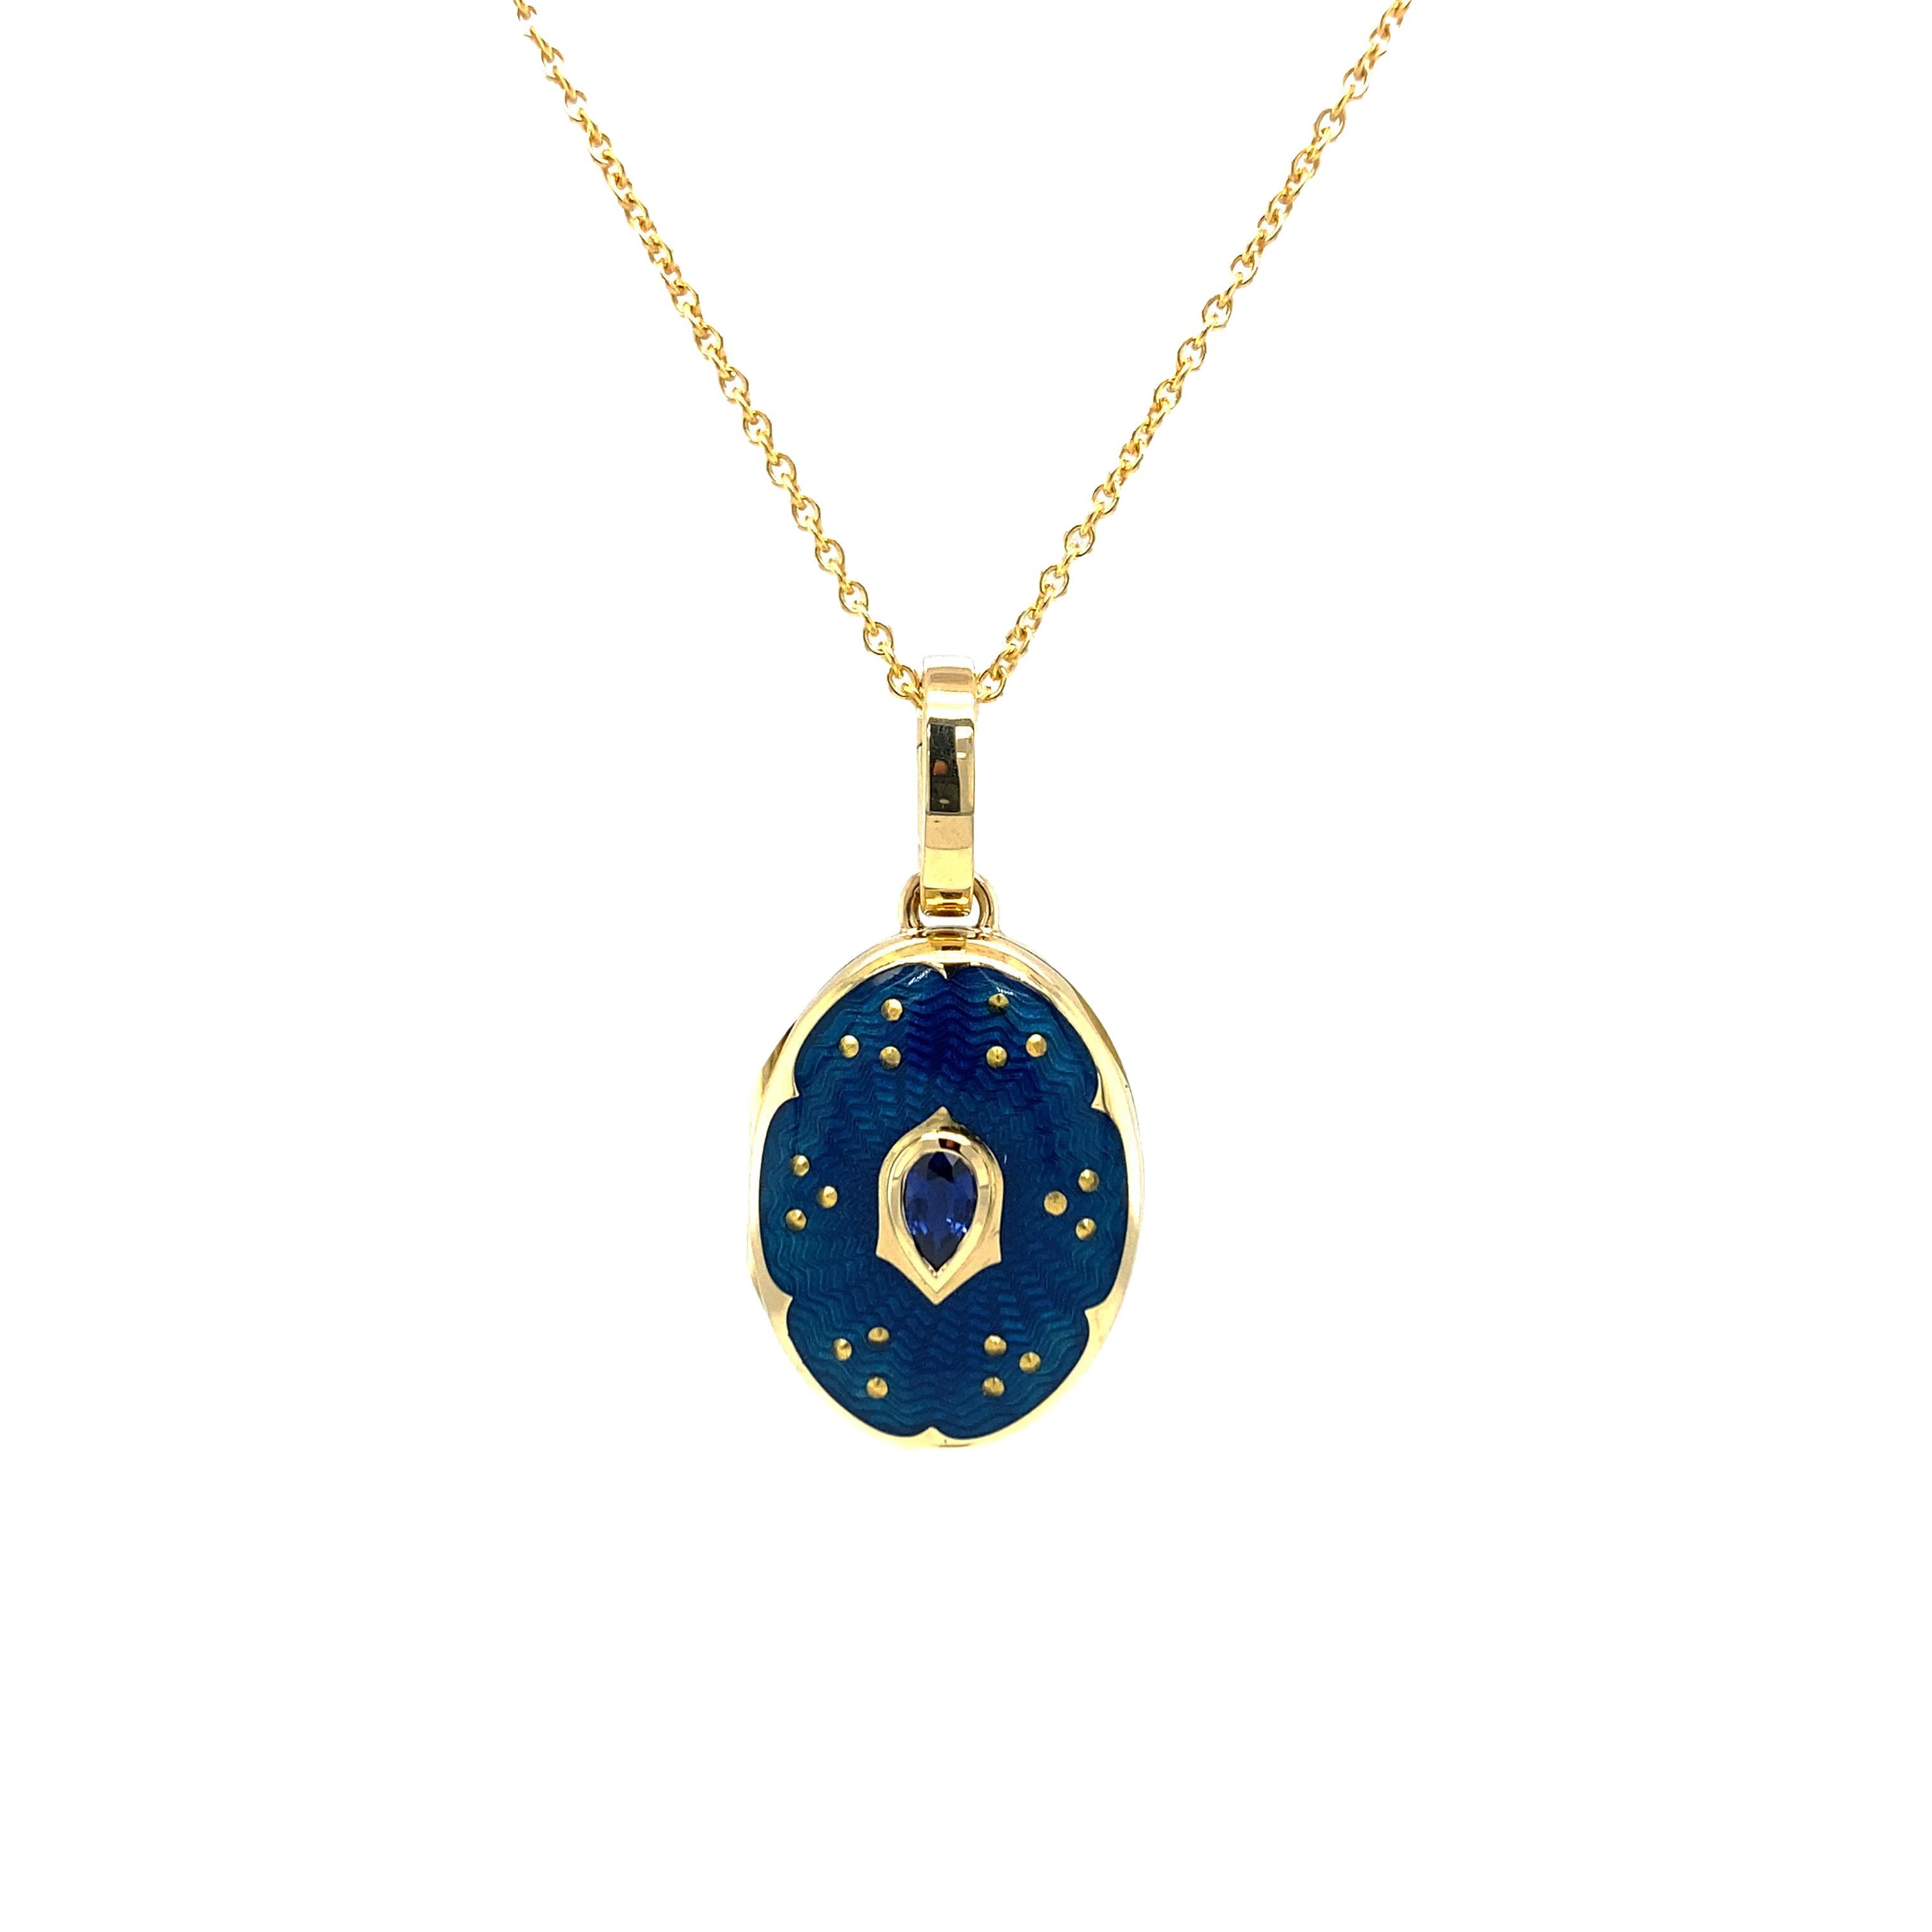  Oval Locket Pendant - 18k Yellow Gold - Blue Enamel with Paillons - 1 Sapphire In New Condition For Sale In Pforzheim, DE